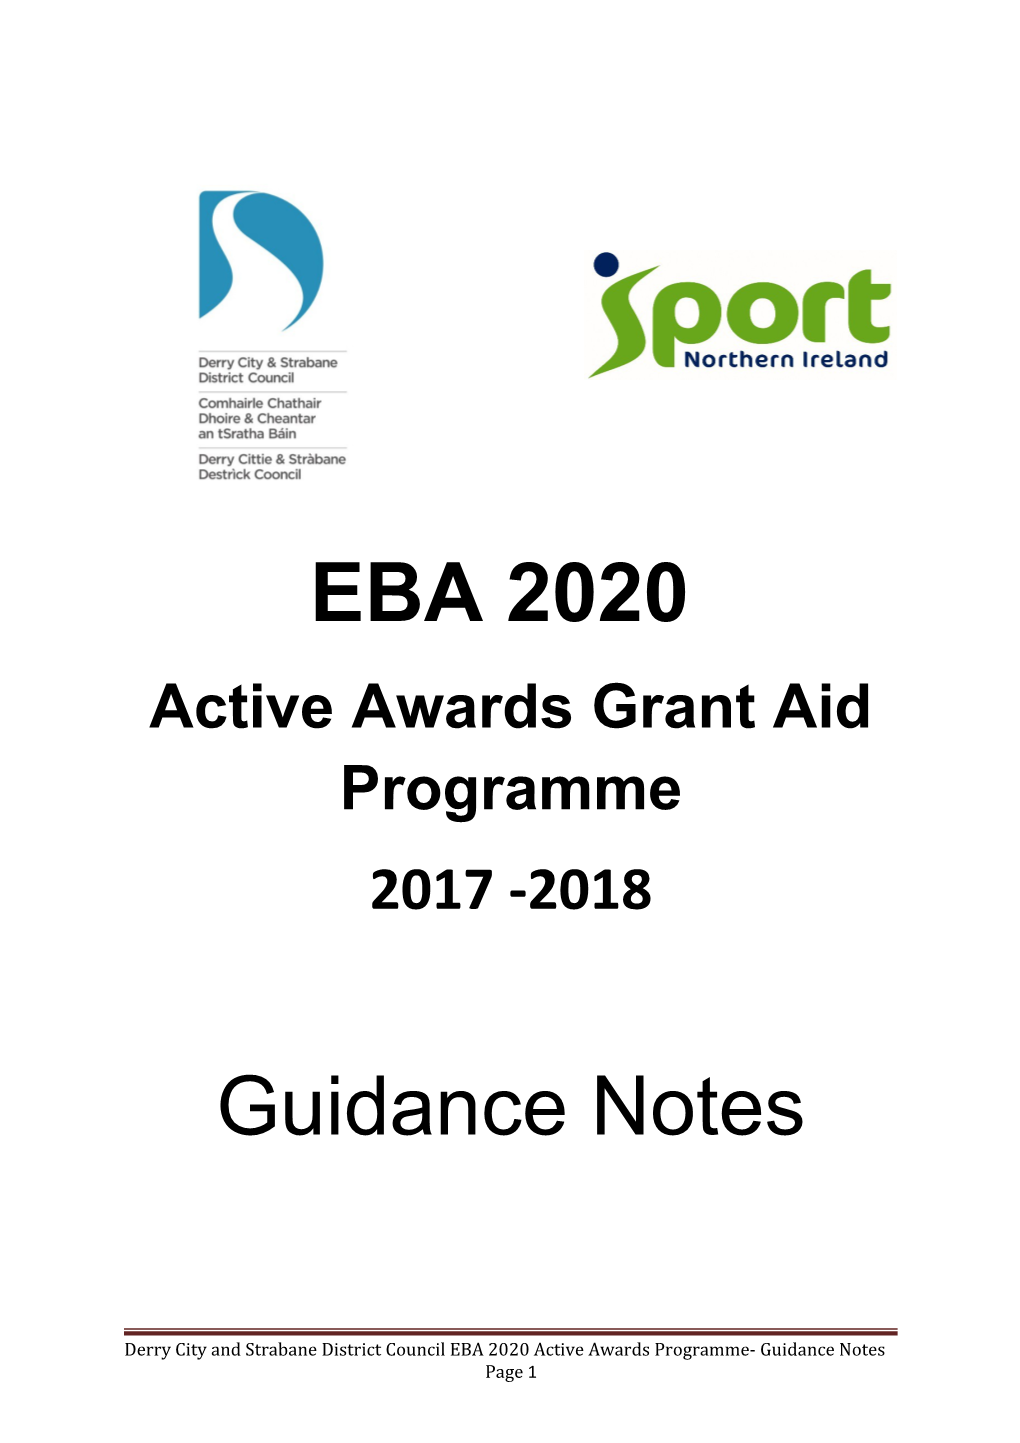 Active Awards Grant Aid Programme